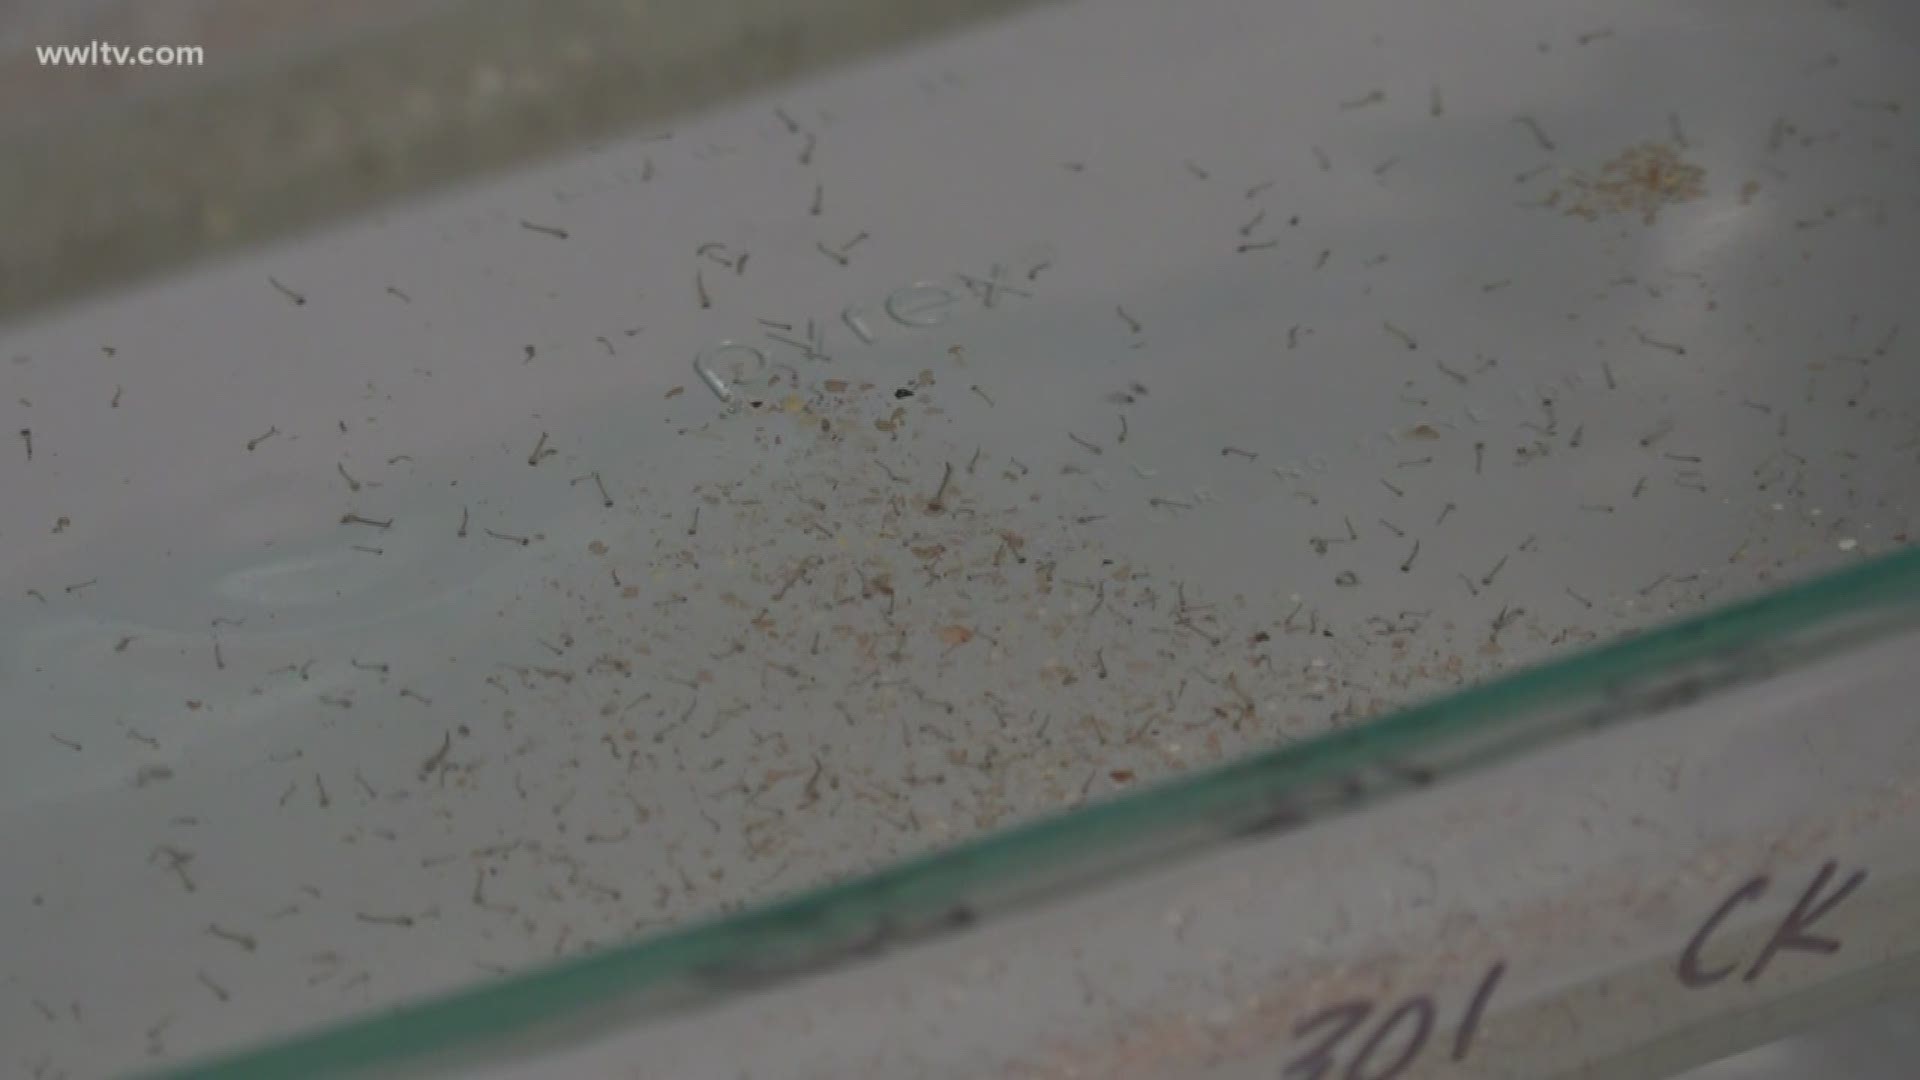 Mosquitoes are already thriving in these hot summer months and with all the rain brought in this weekend, the problem could get worse.